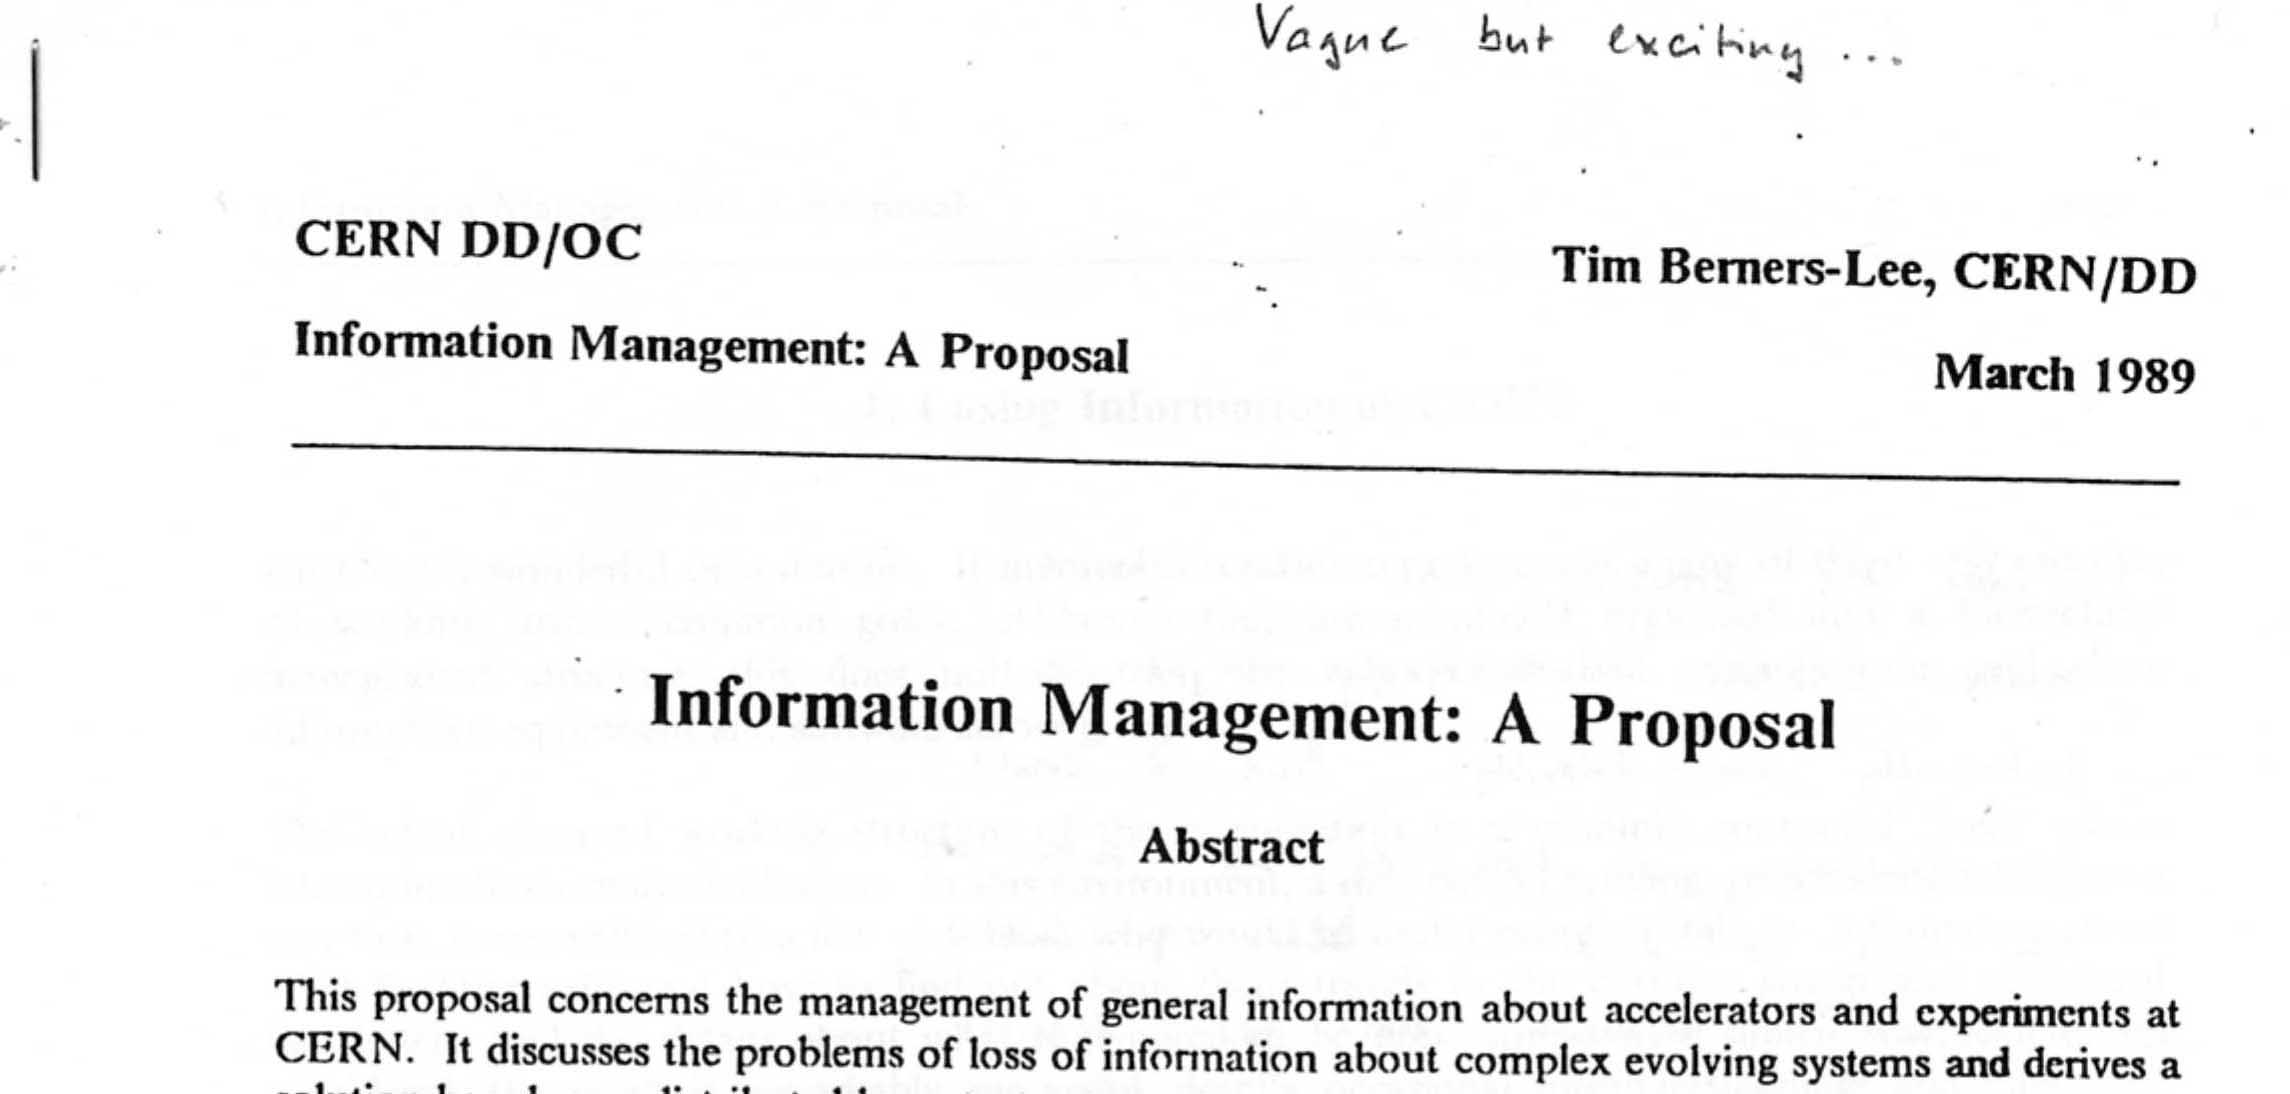 [Tim Berners-Lee’s original proposal for what would become the Web]